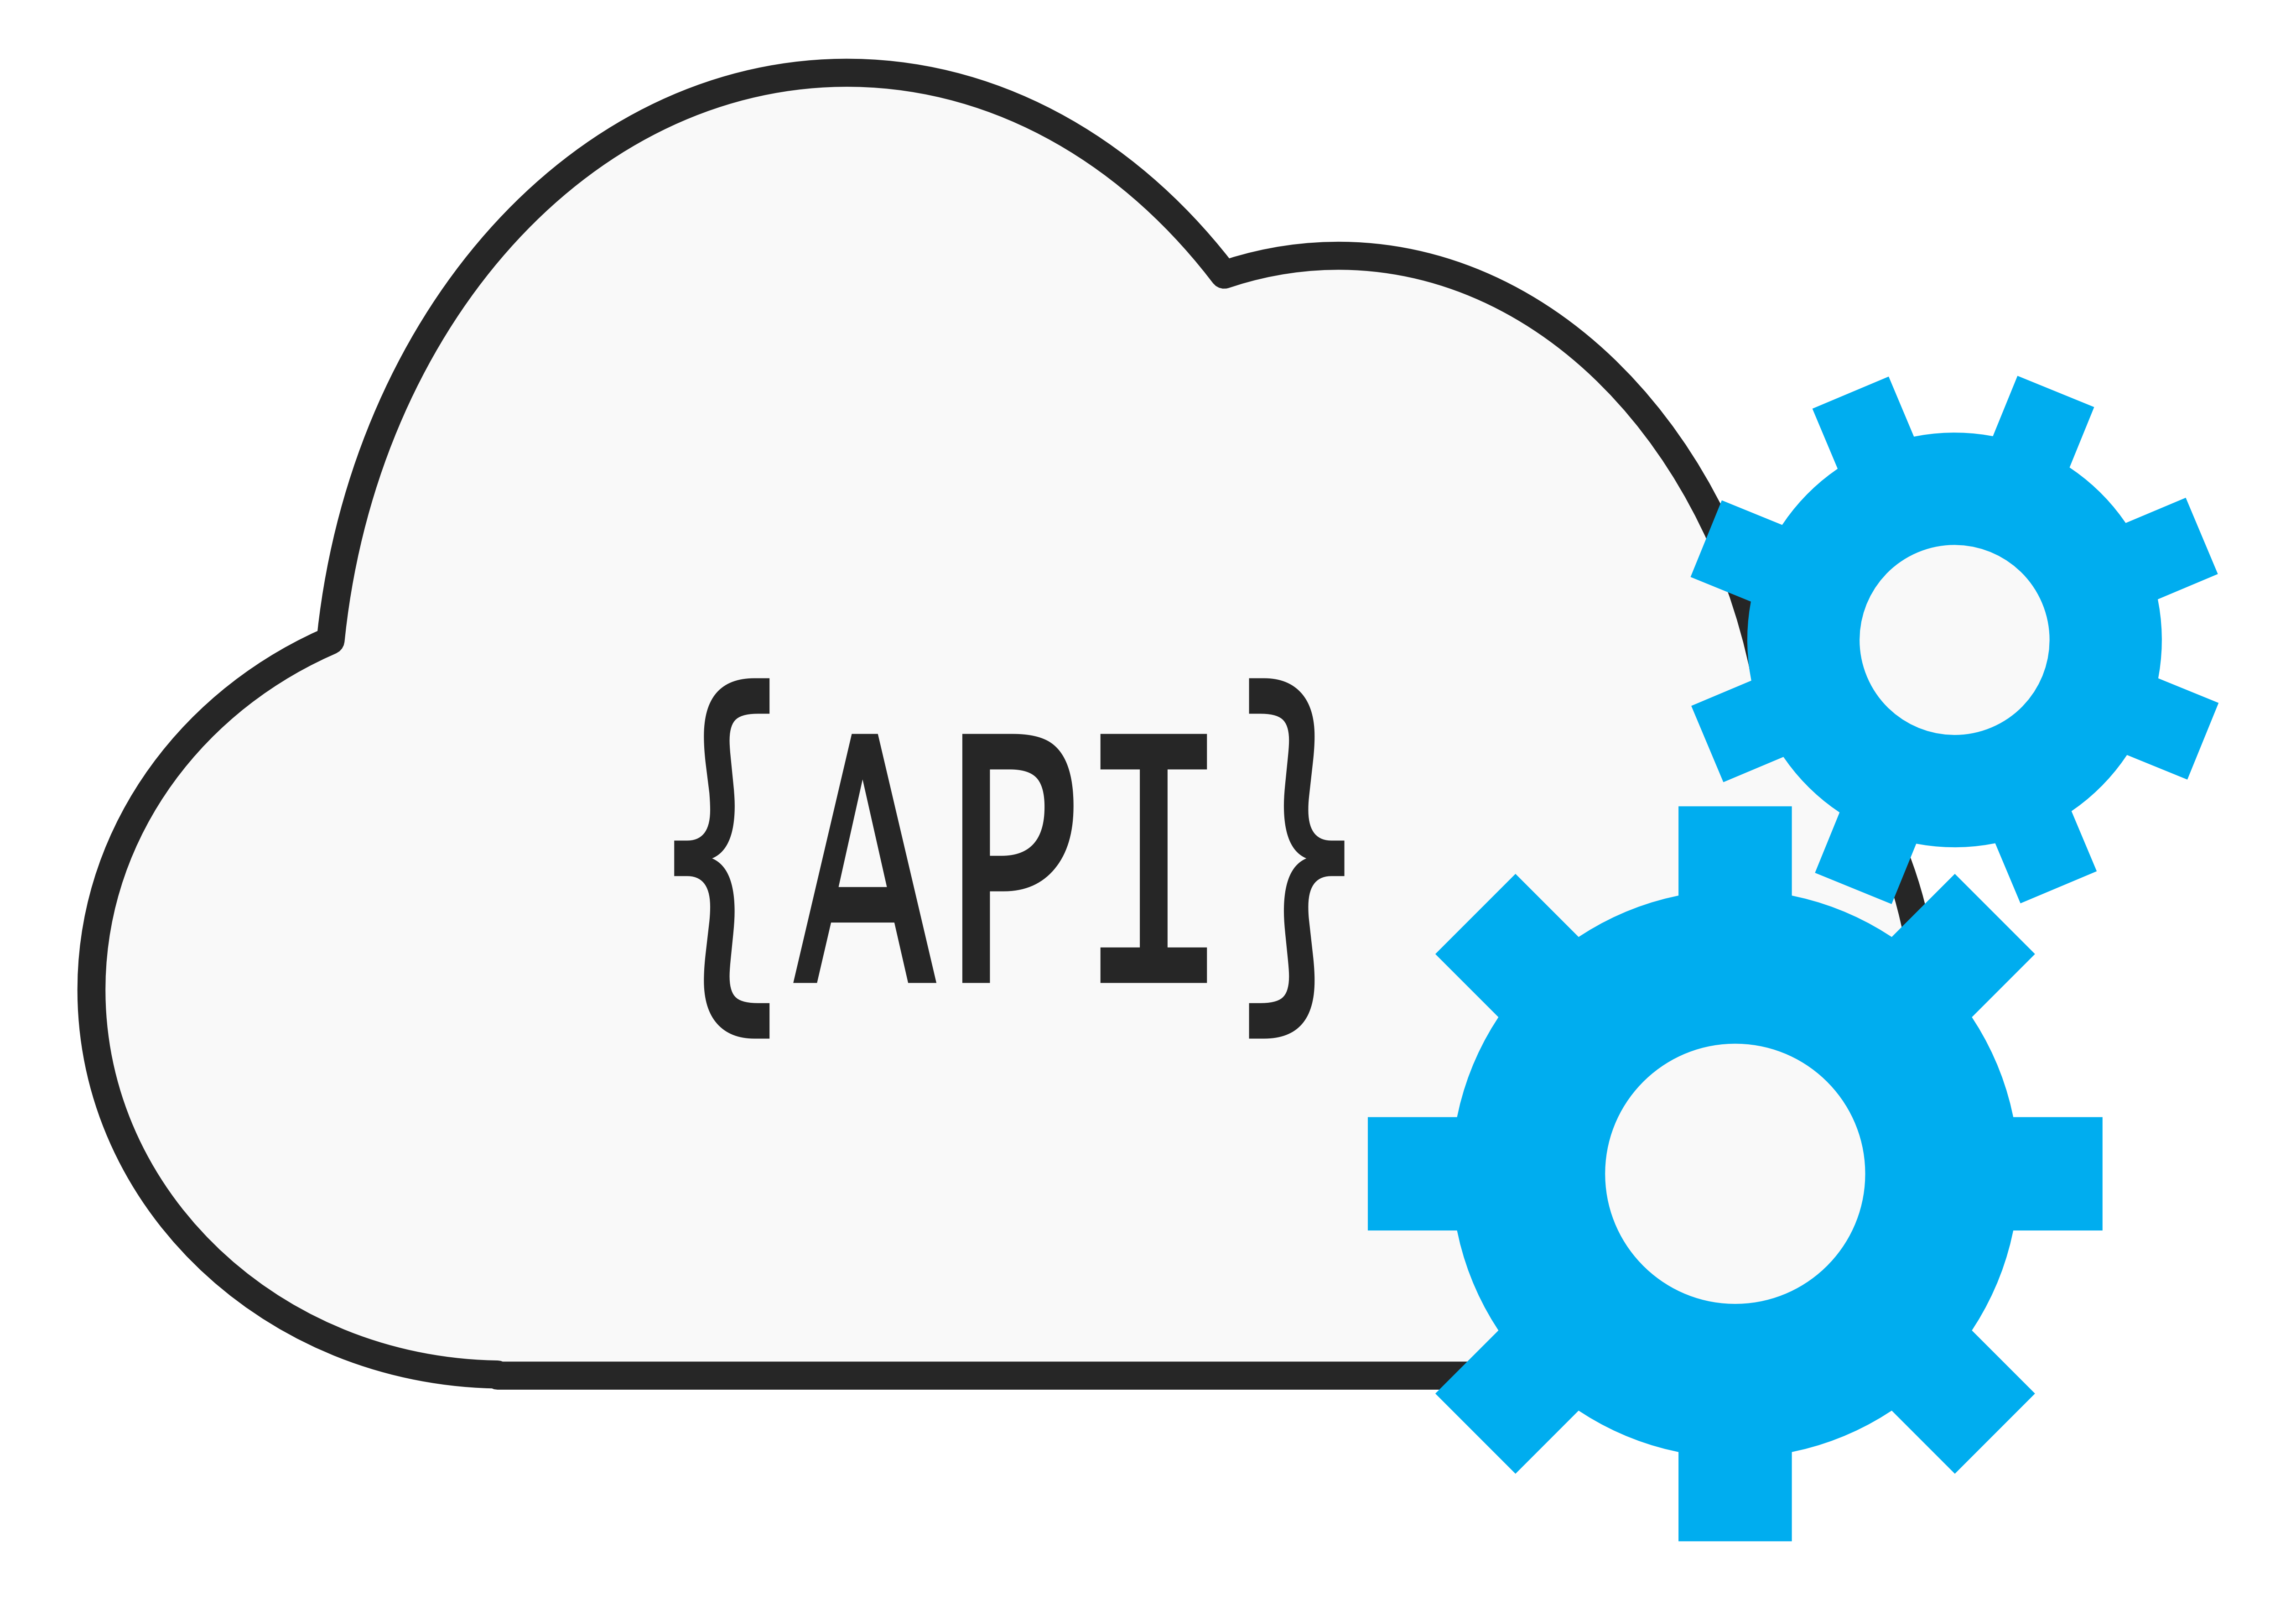 API graphic showing a cloud and cogs